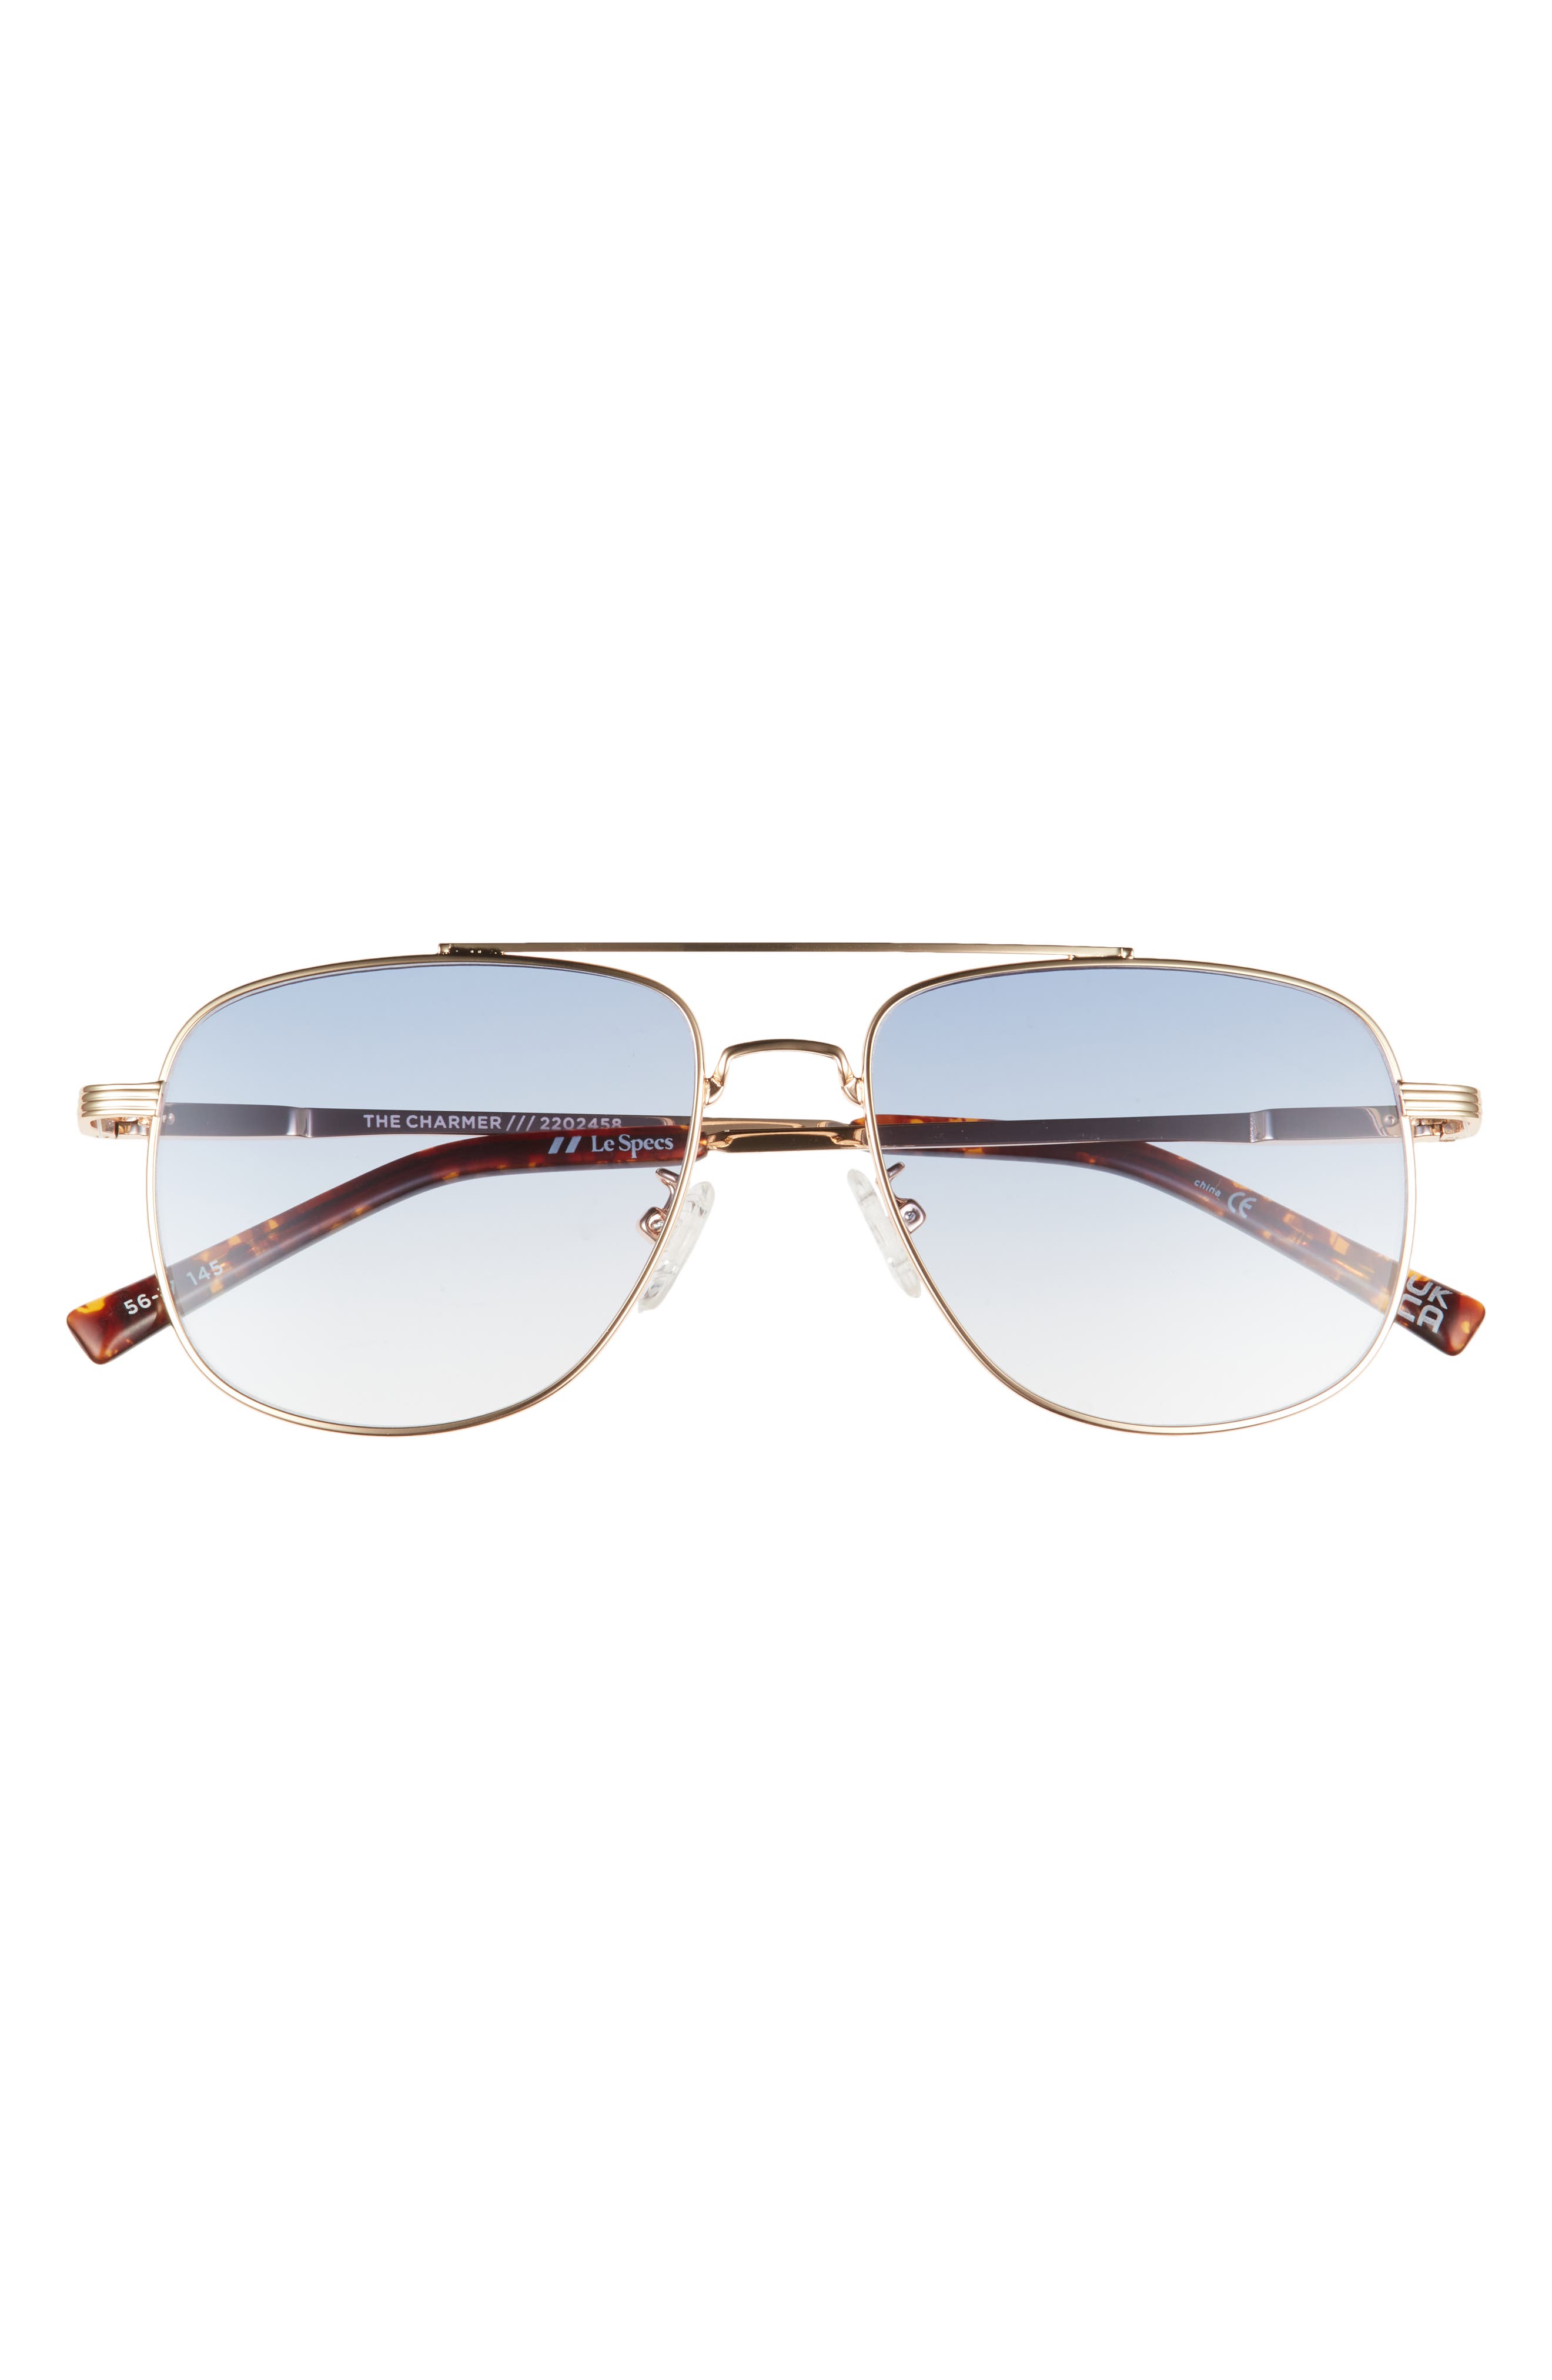 Le Specs The Charmer 56mm Aviator Sunglasses in Bright Gold/Blue Grad at Nordstrom